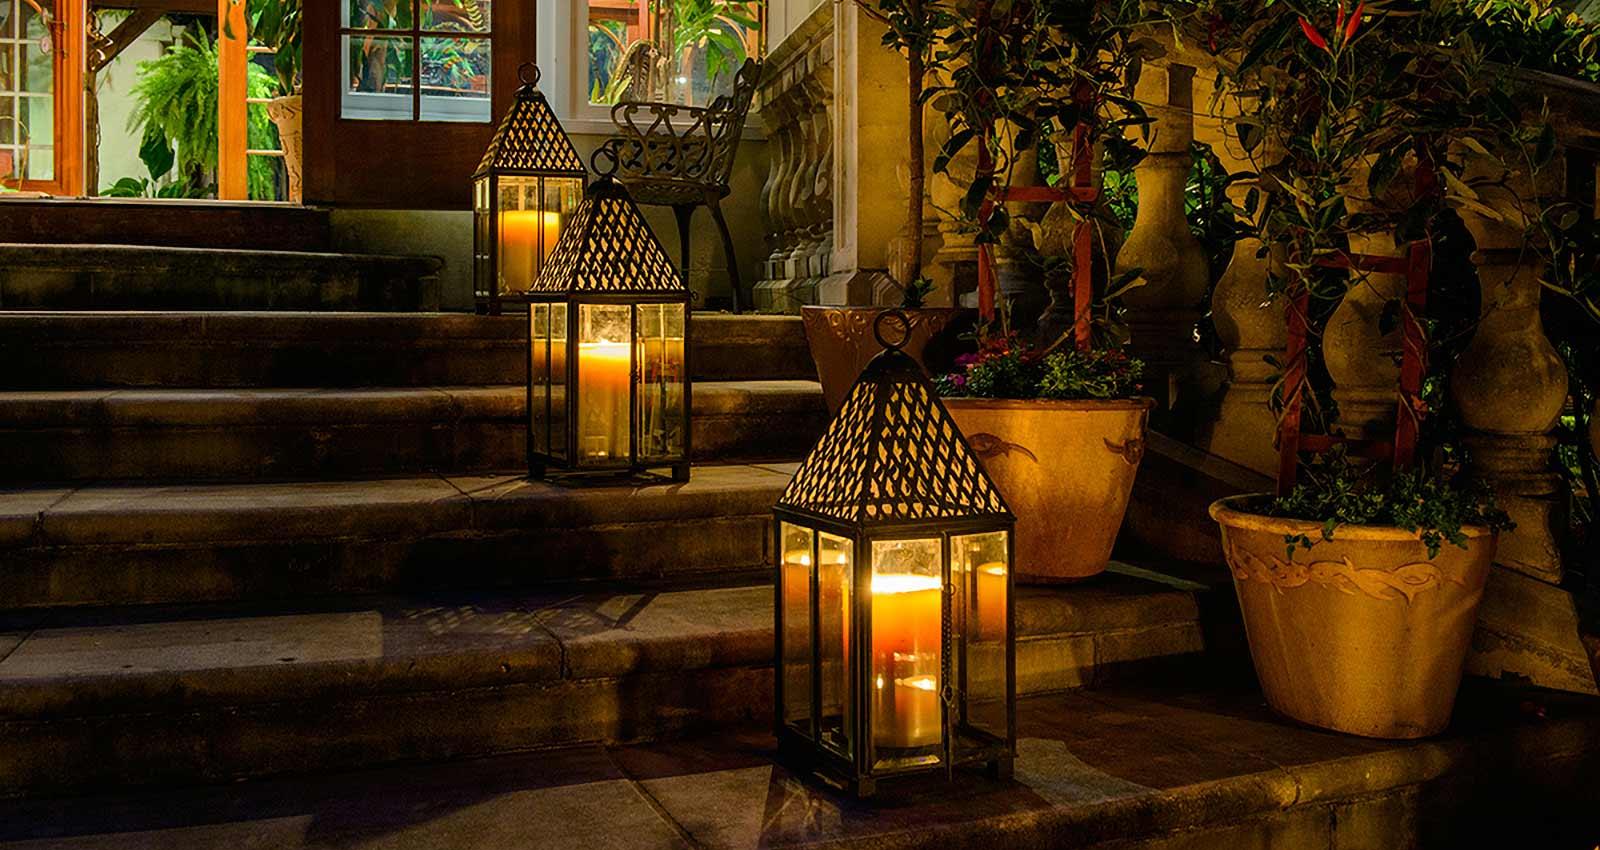 Candles on the Staircase